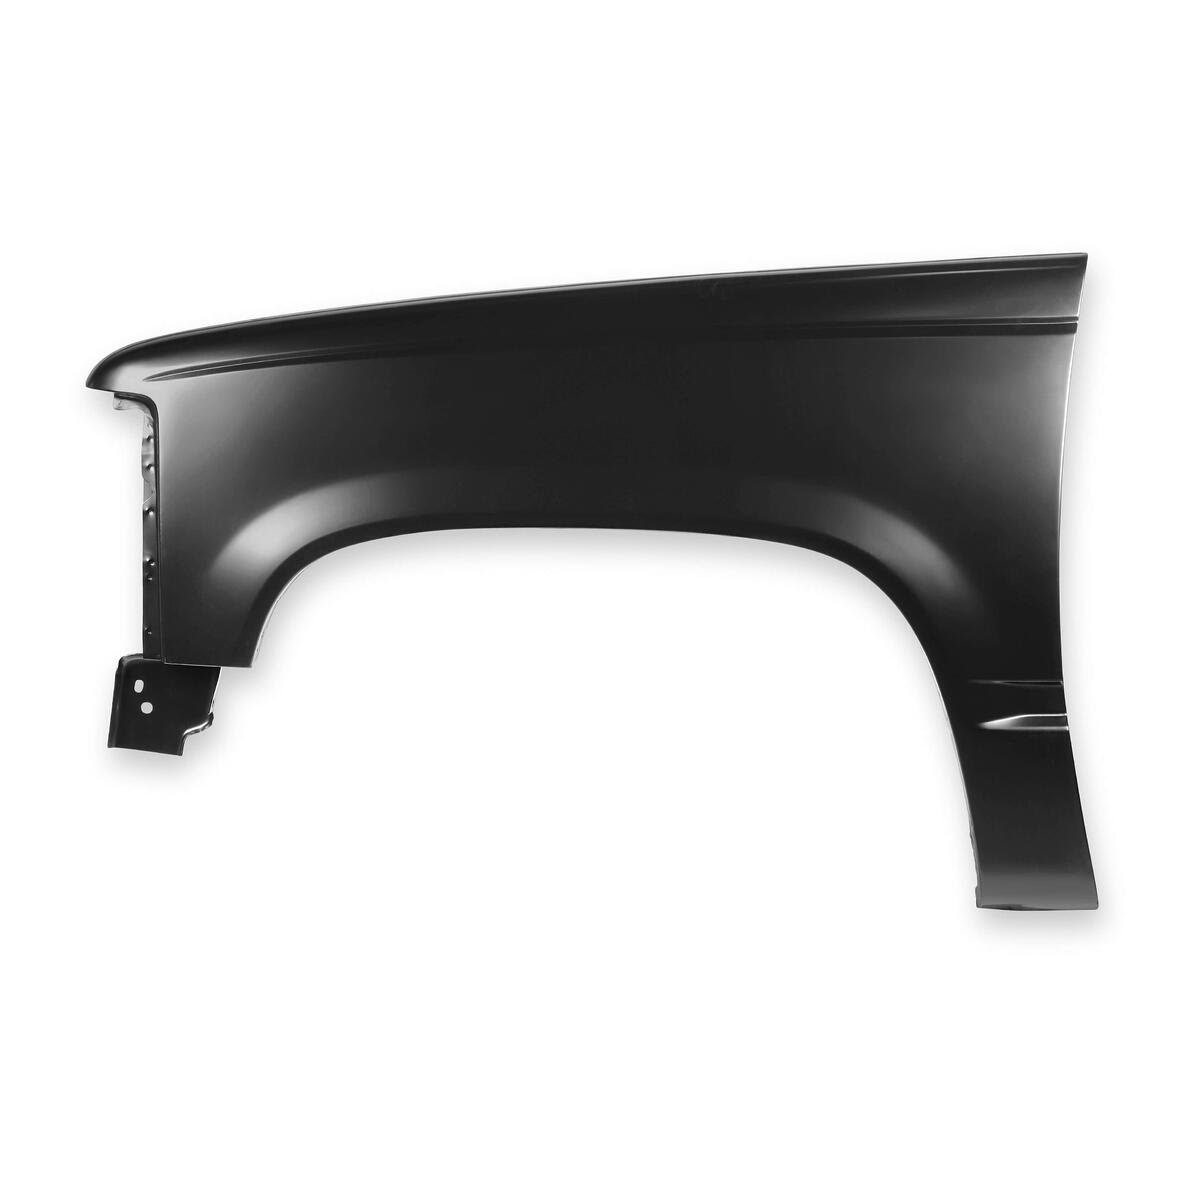 Holley Classic Trucks Replacement Fenders For 1988-1998 Chevy/GMC GMT400 Trucks